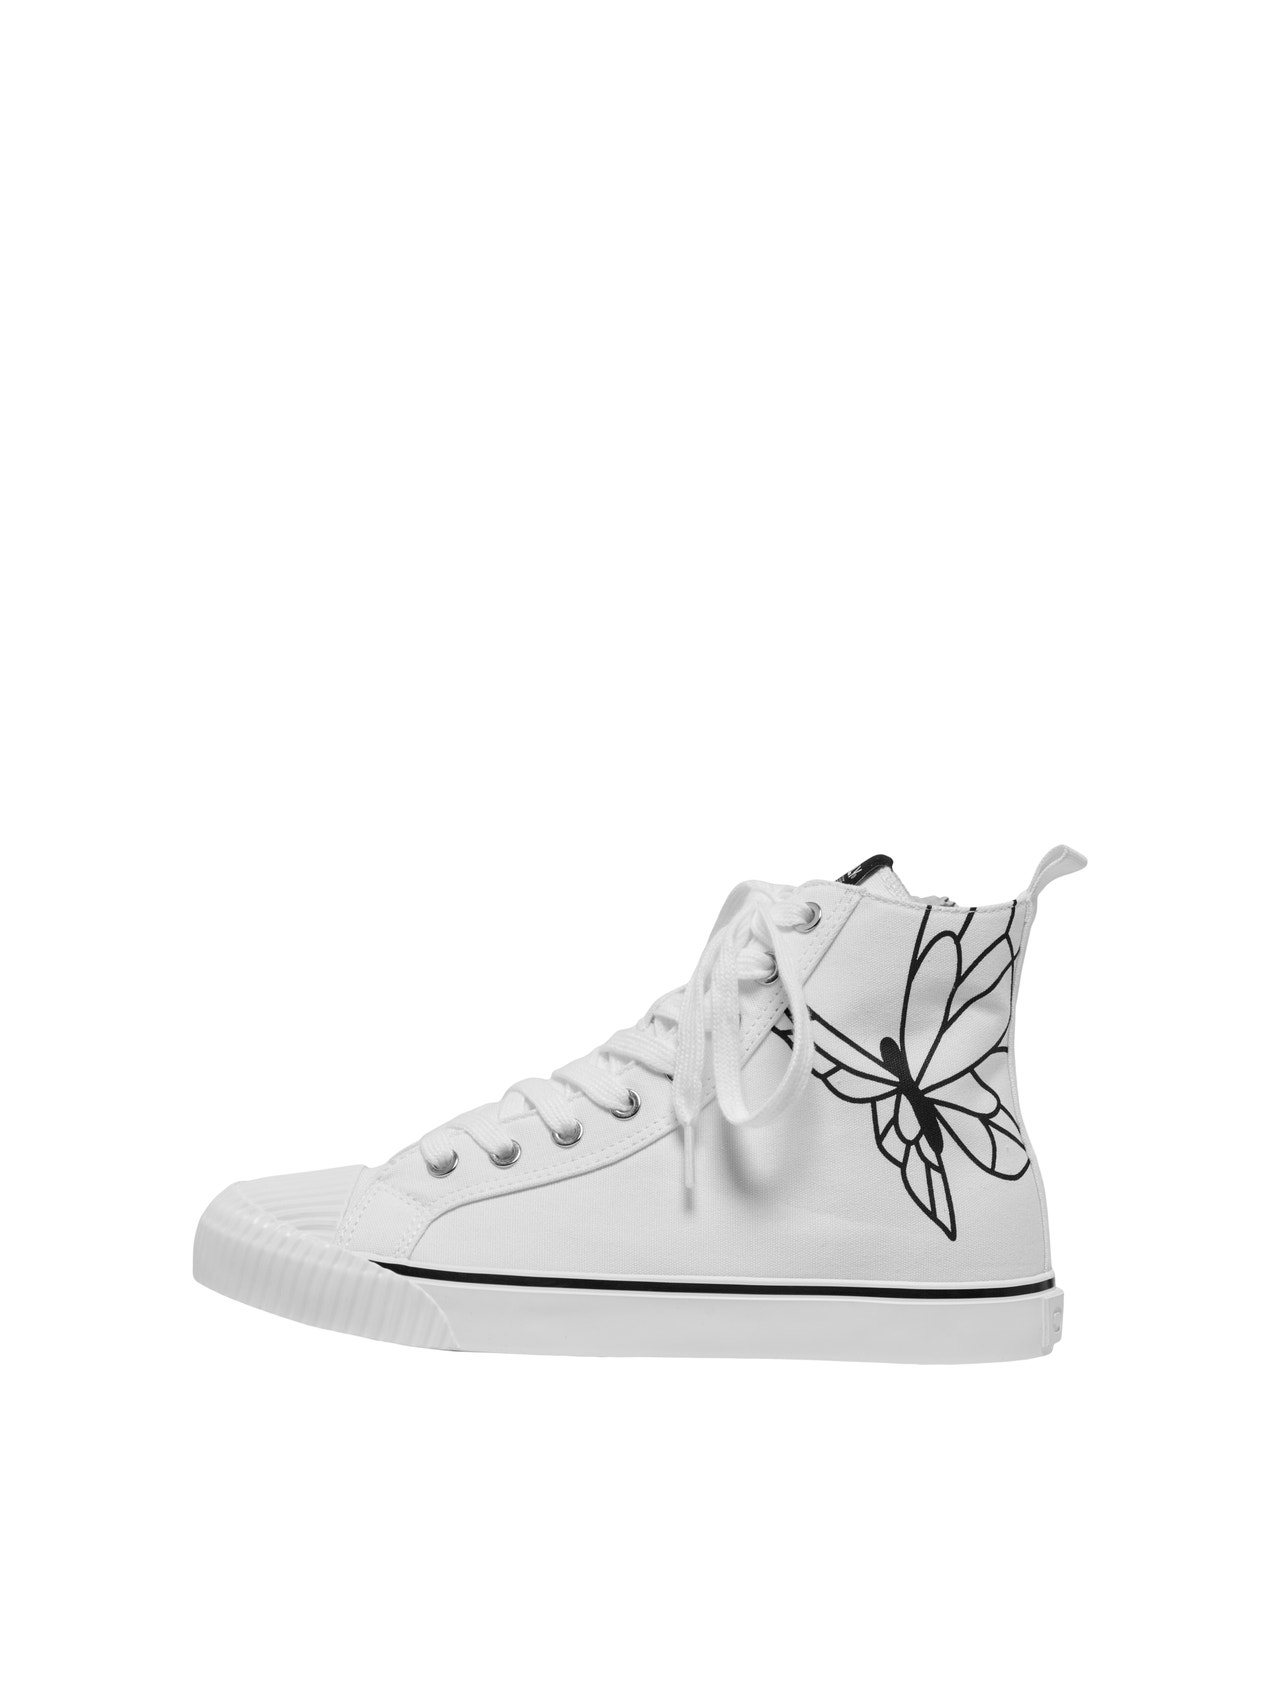 ONLY Printed sneakers -White - 15288088